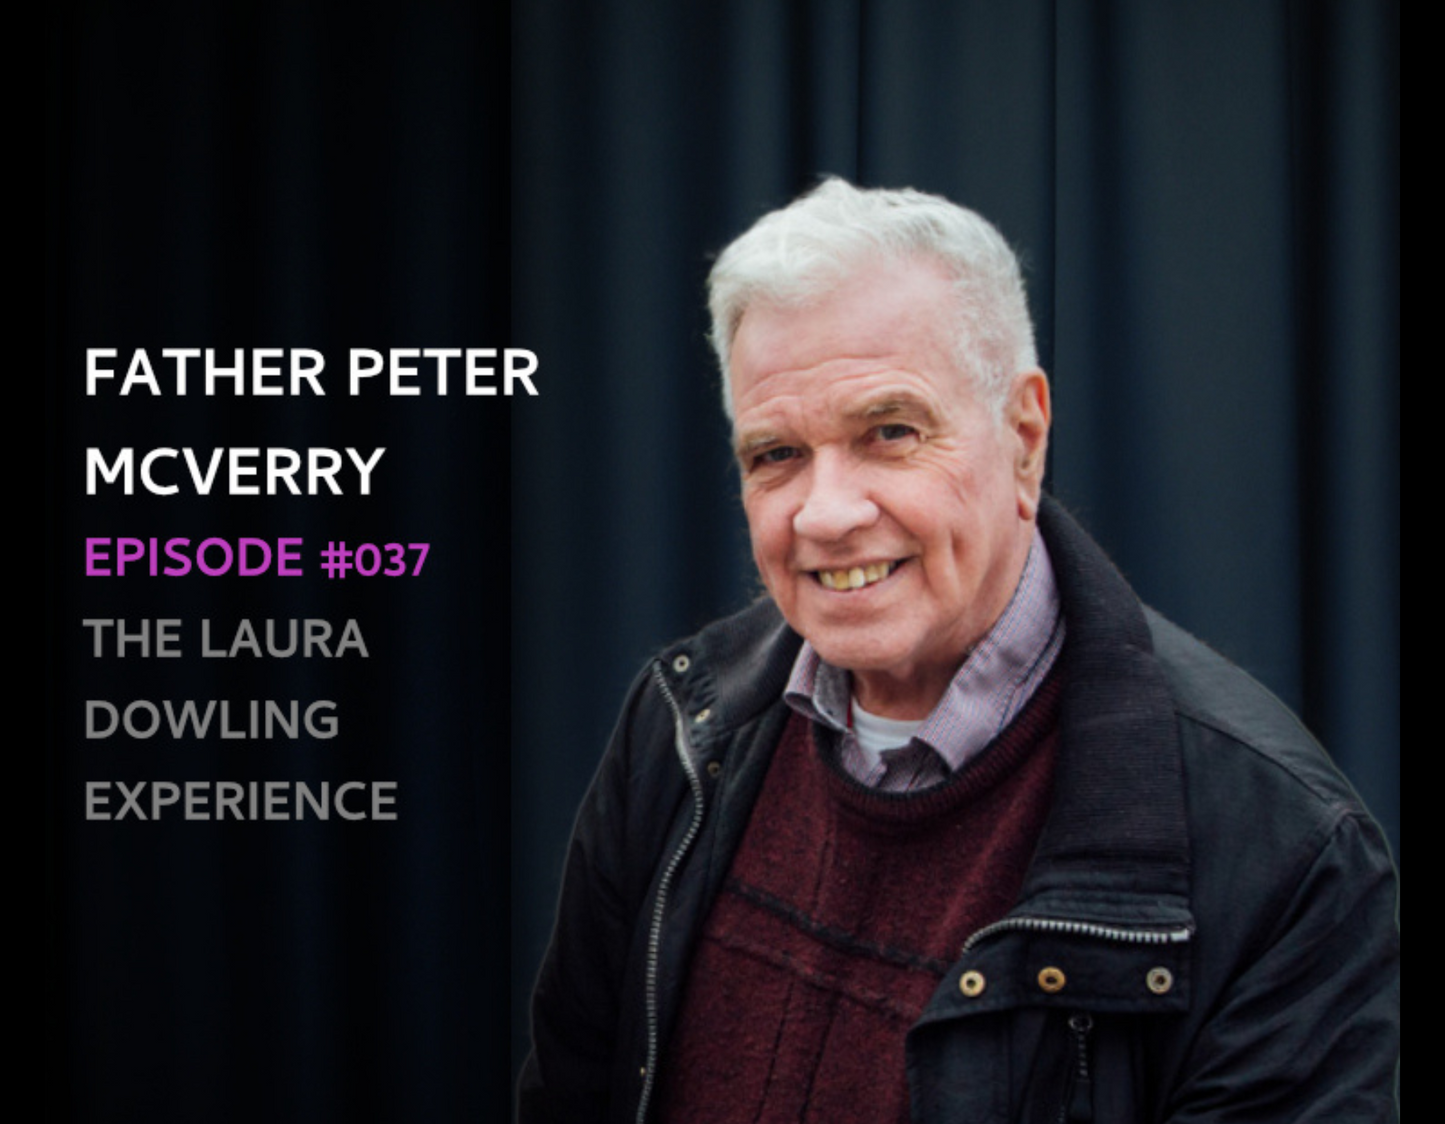 Fr Peter McVerry - a candid discussion and critique of government policy covering homelessness, drugs and criminal justice # 37